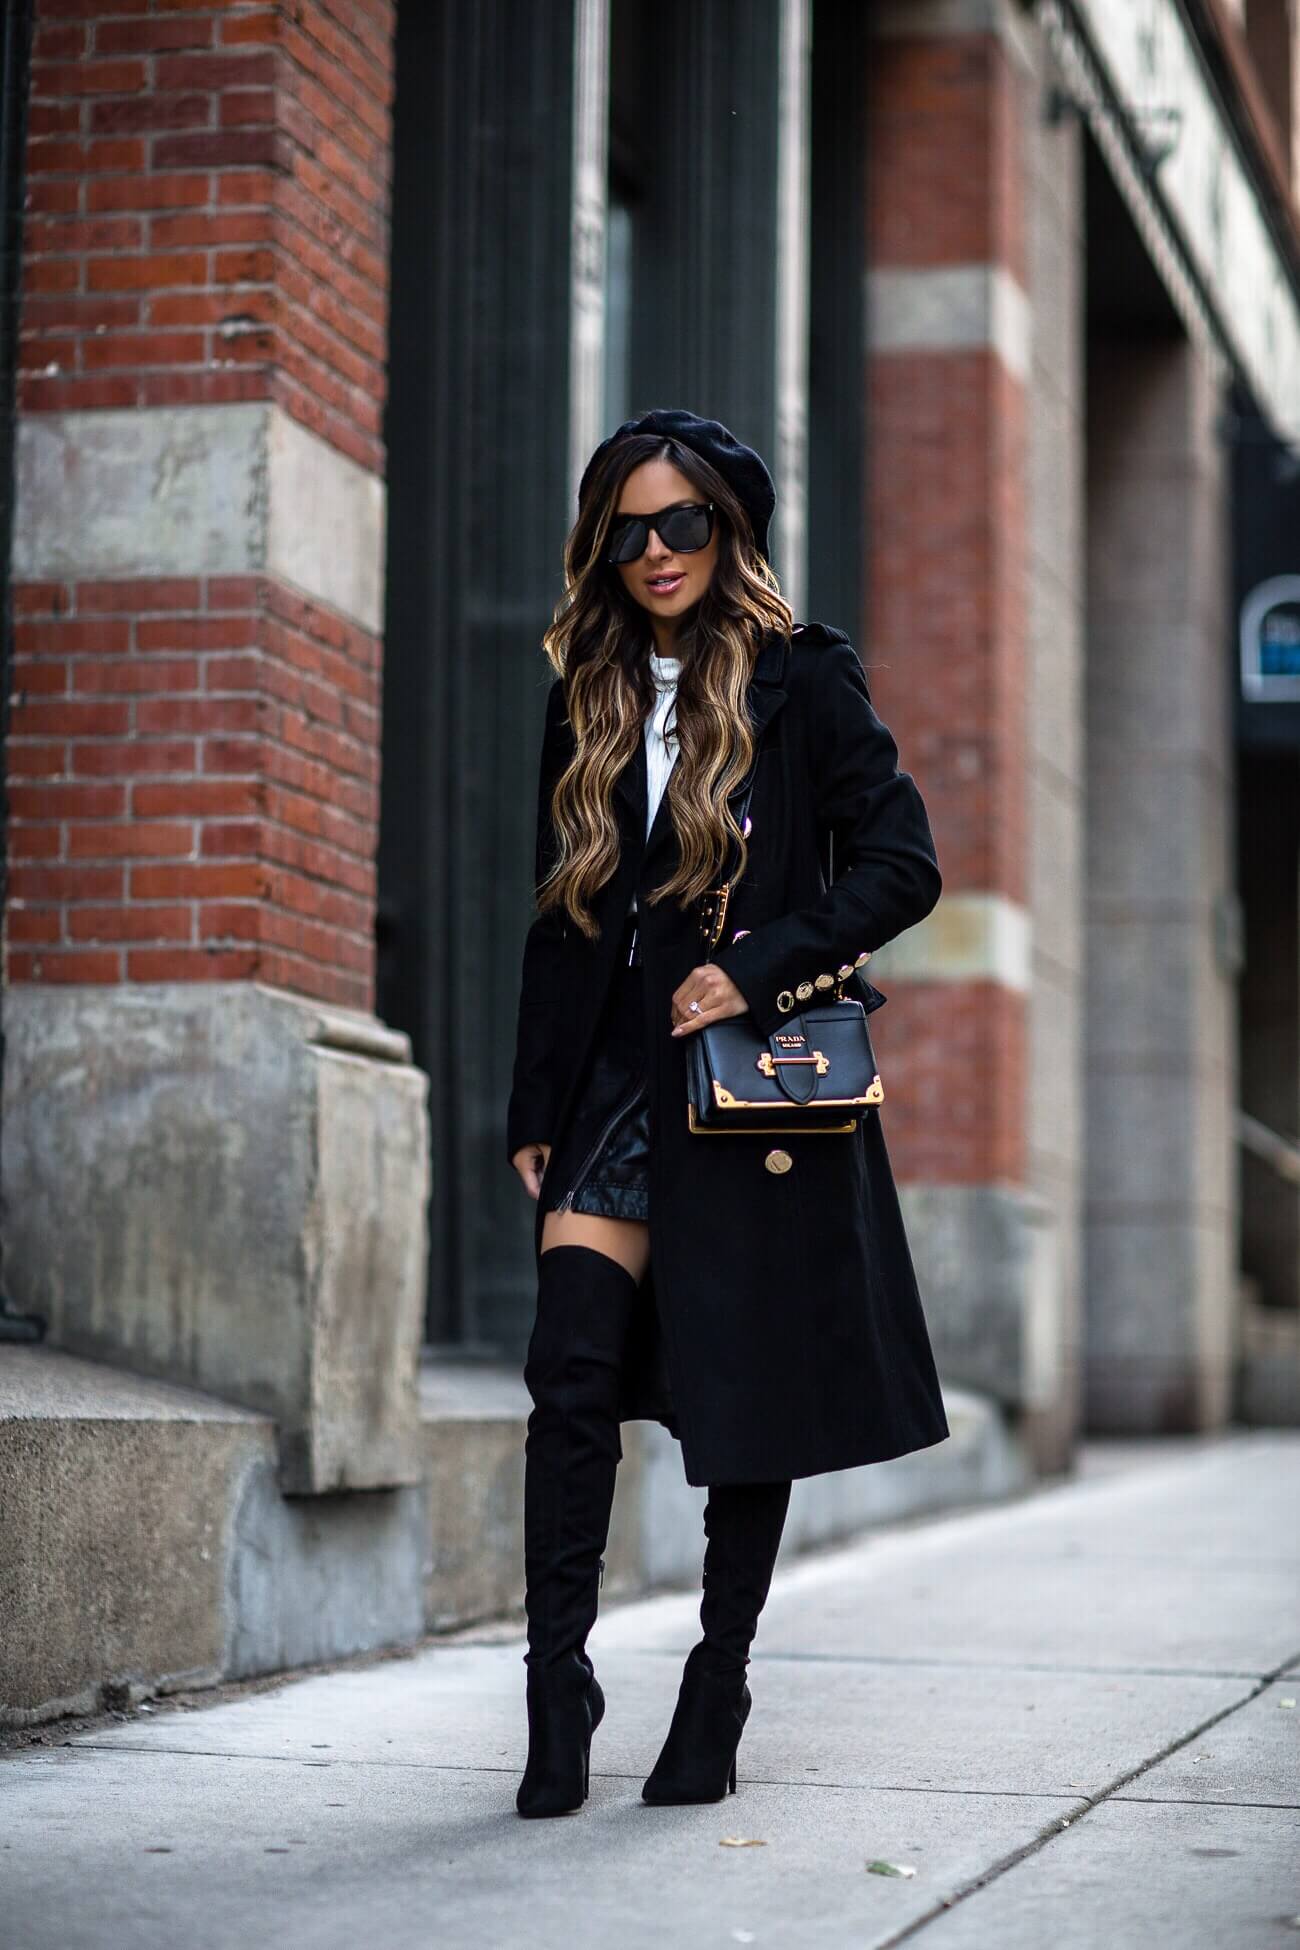 fashion blogger mia mia mine wearing a prada cahier bag and kendall + kylie over the knee boots